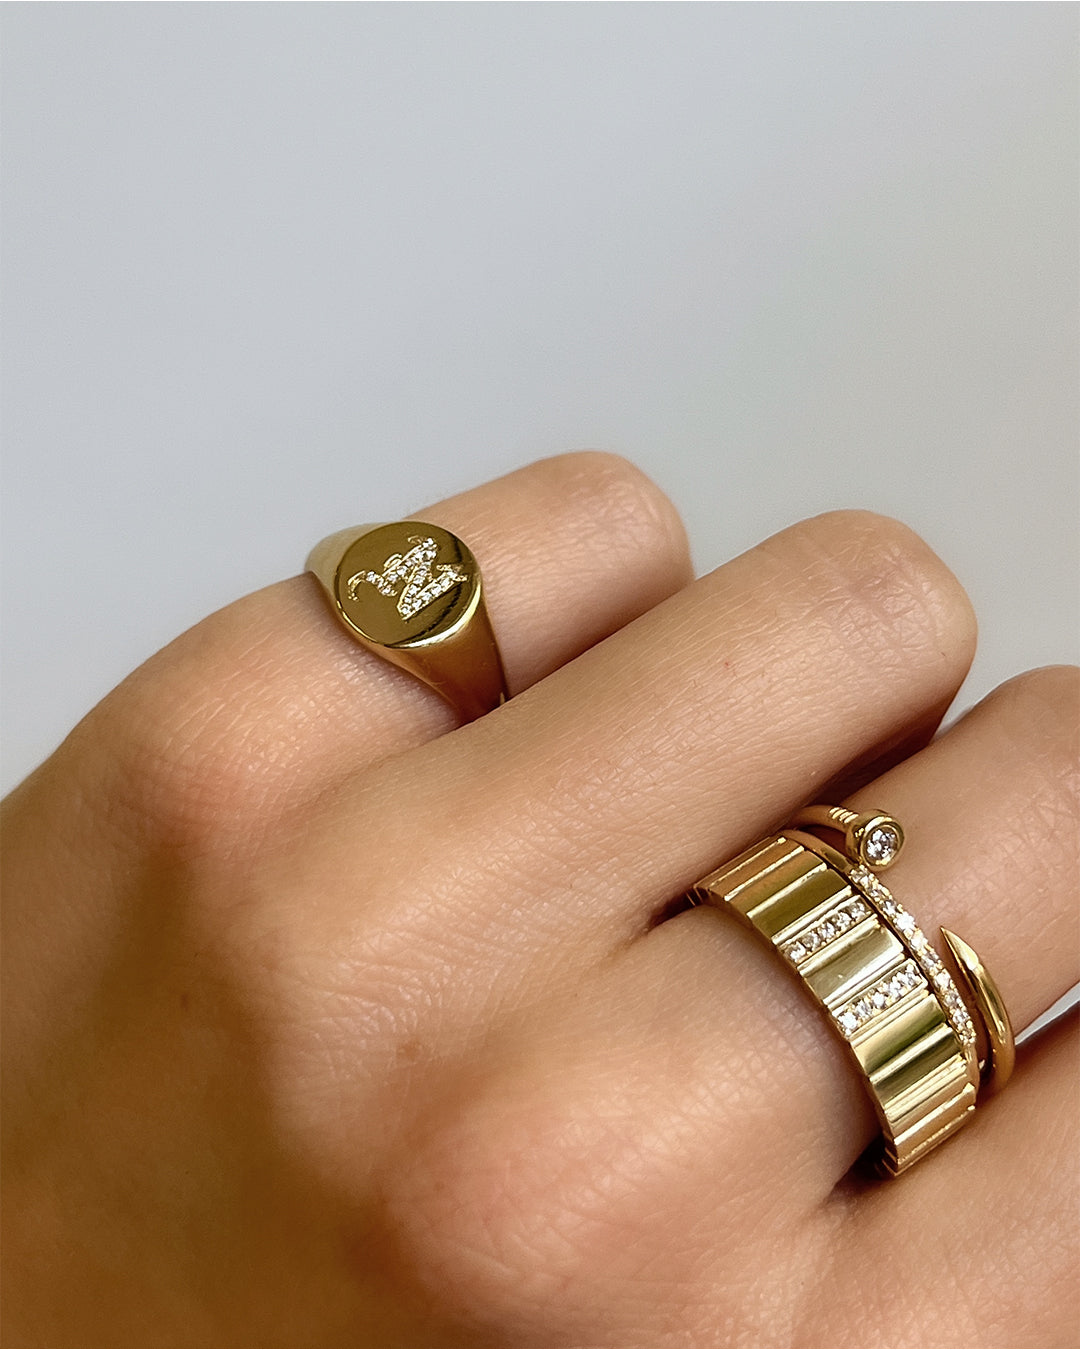  Monogram Signet Ring, Bold Chunky Personalized Letter